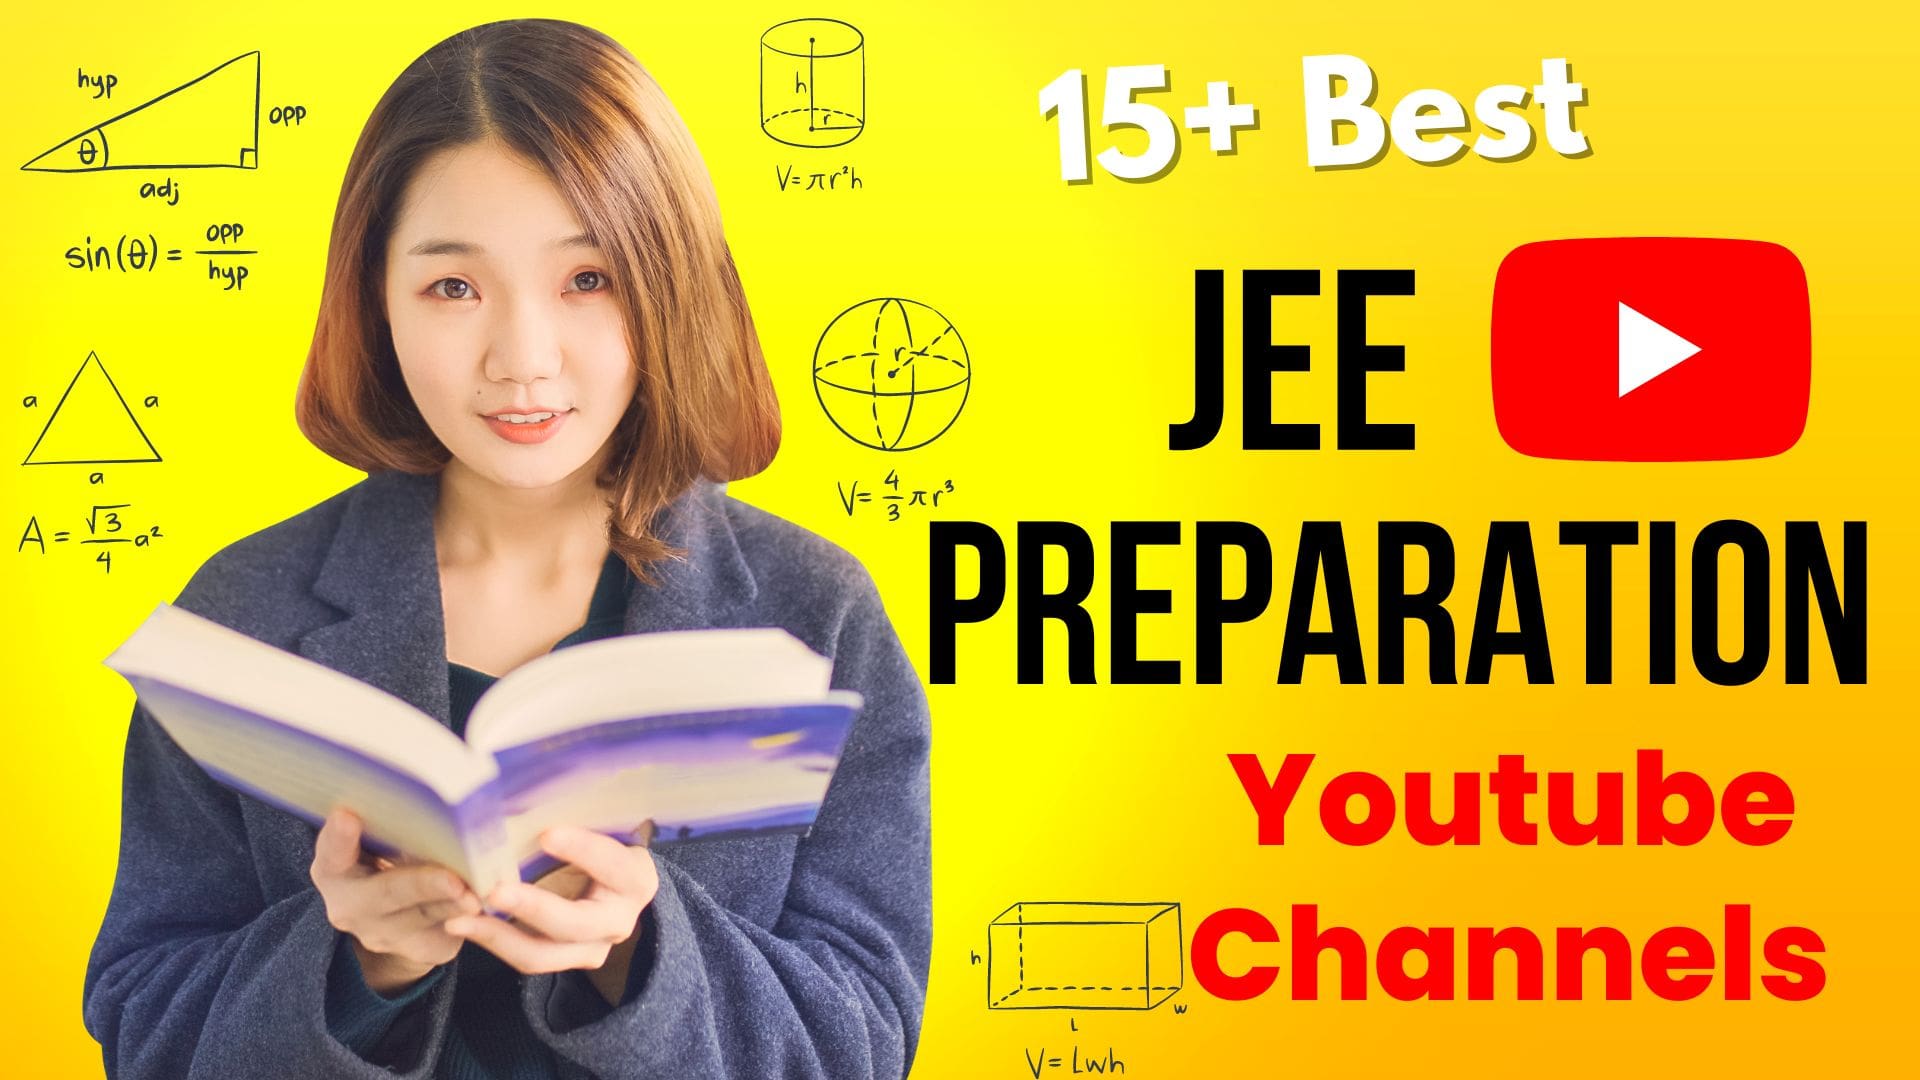 best-youtube-channels-for-jee-preparation